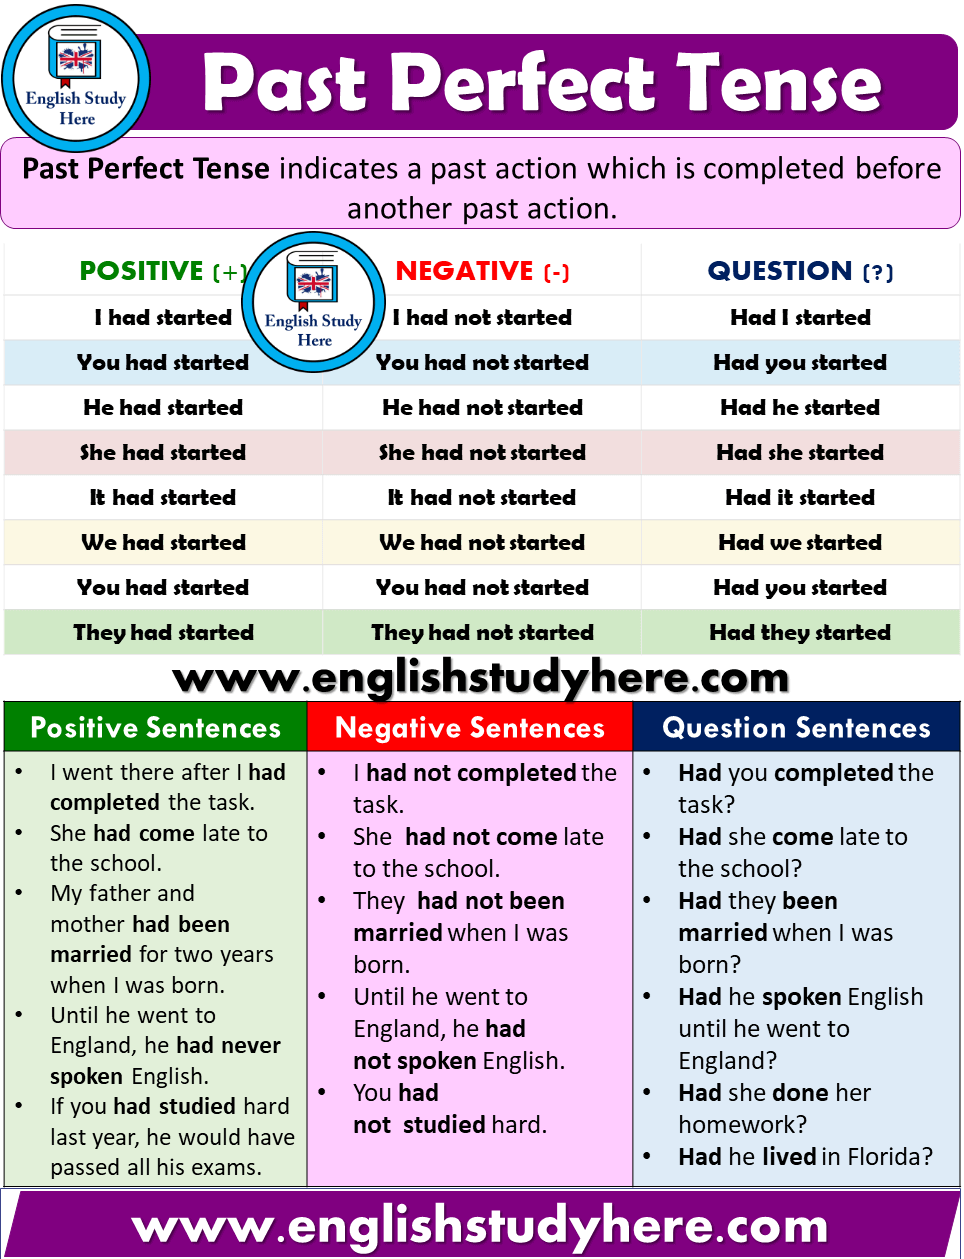 Past Perfect Tense - Detailed Expression - English Study Here